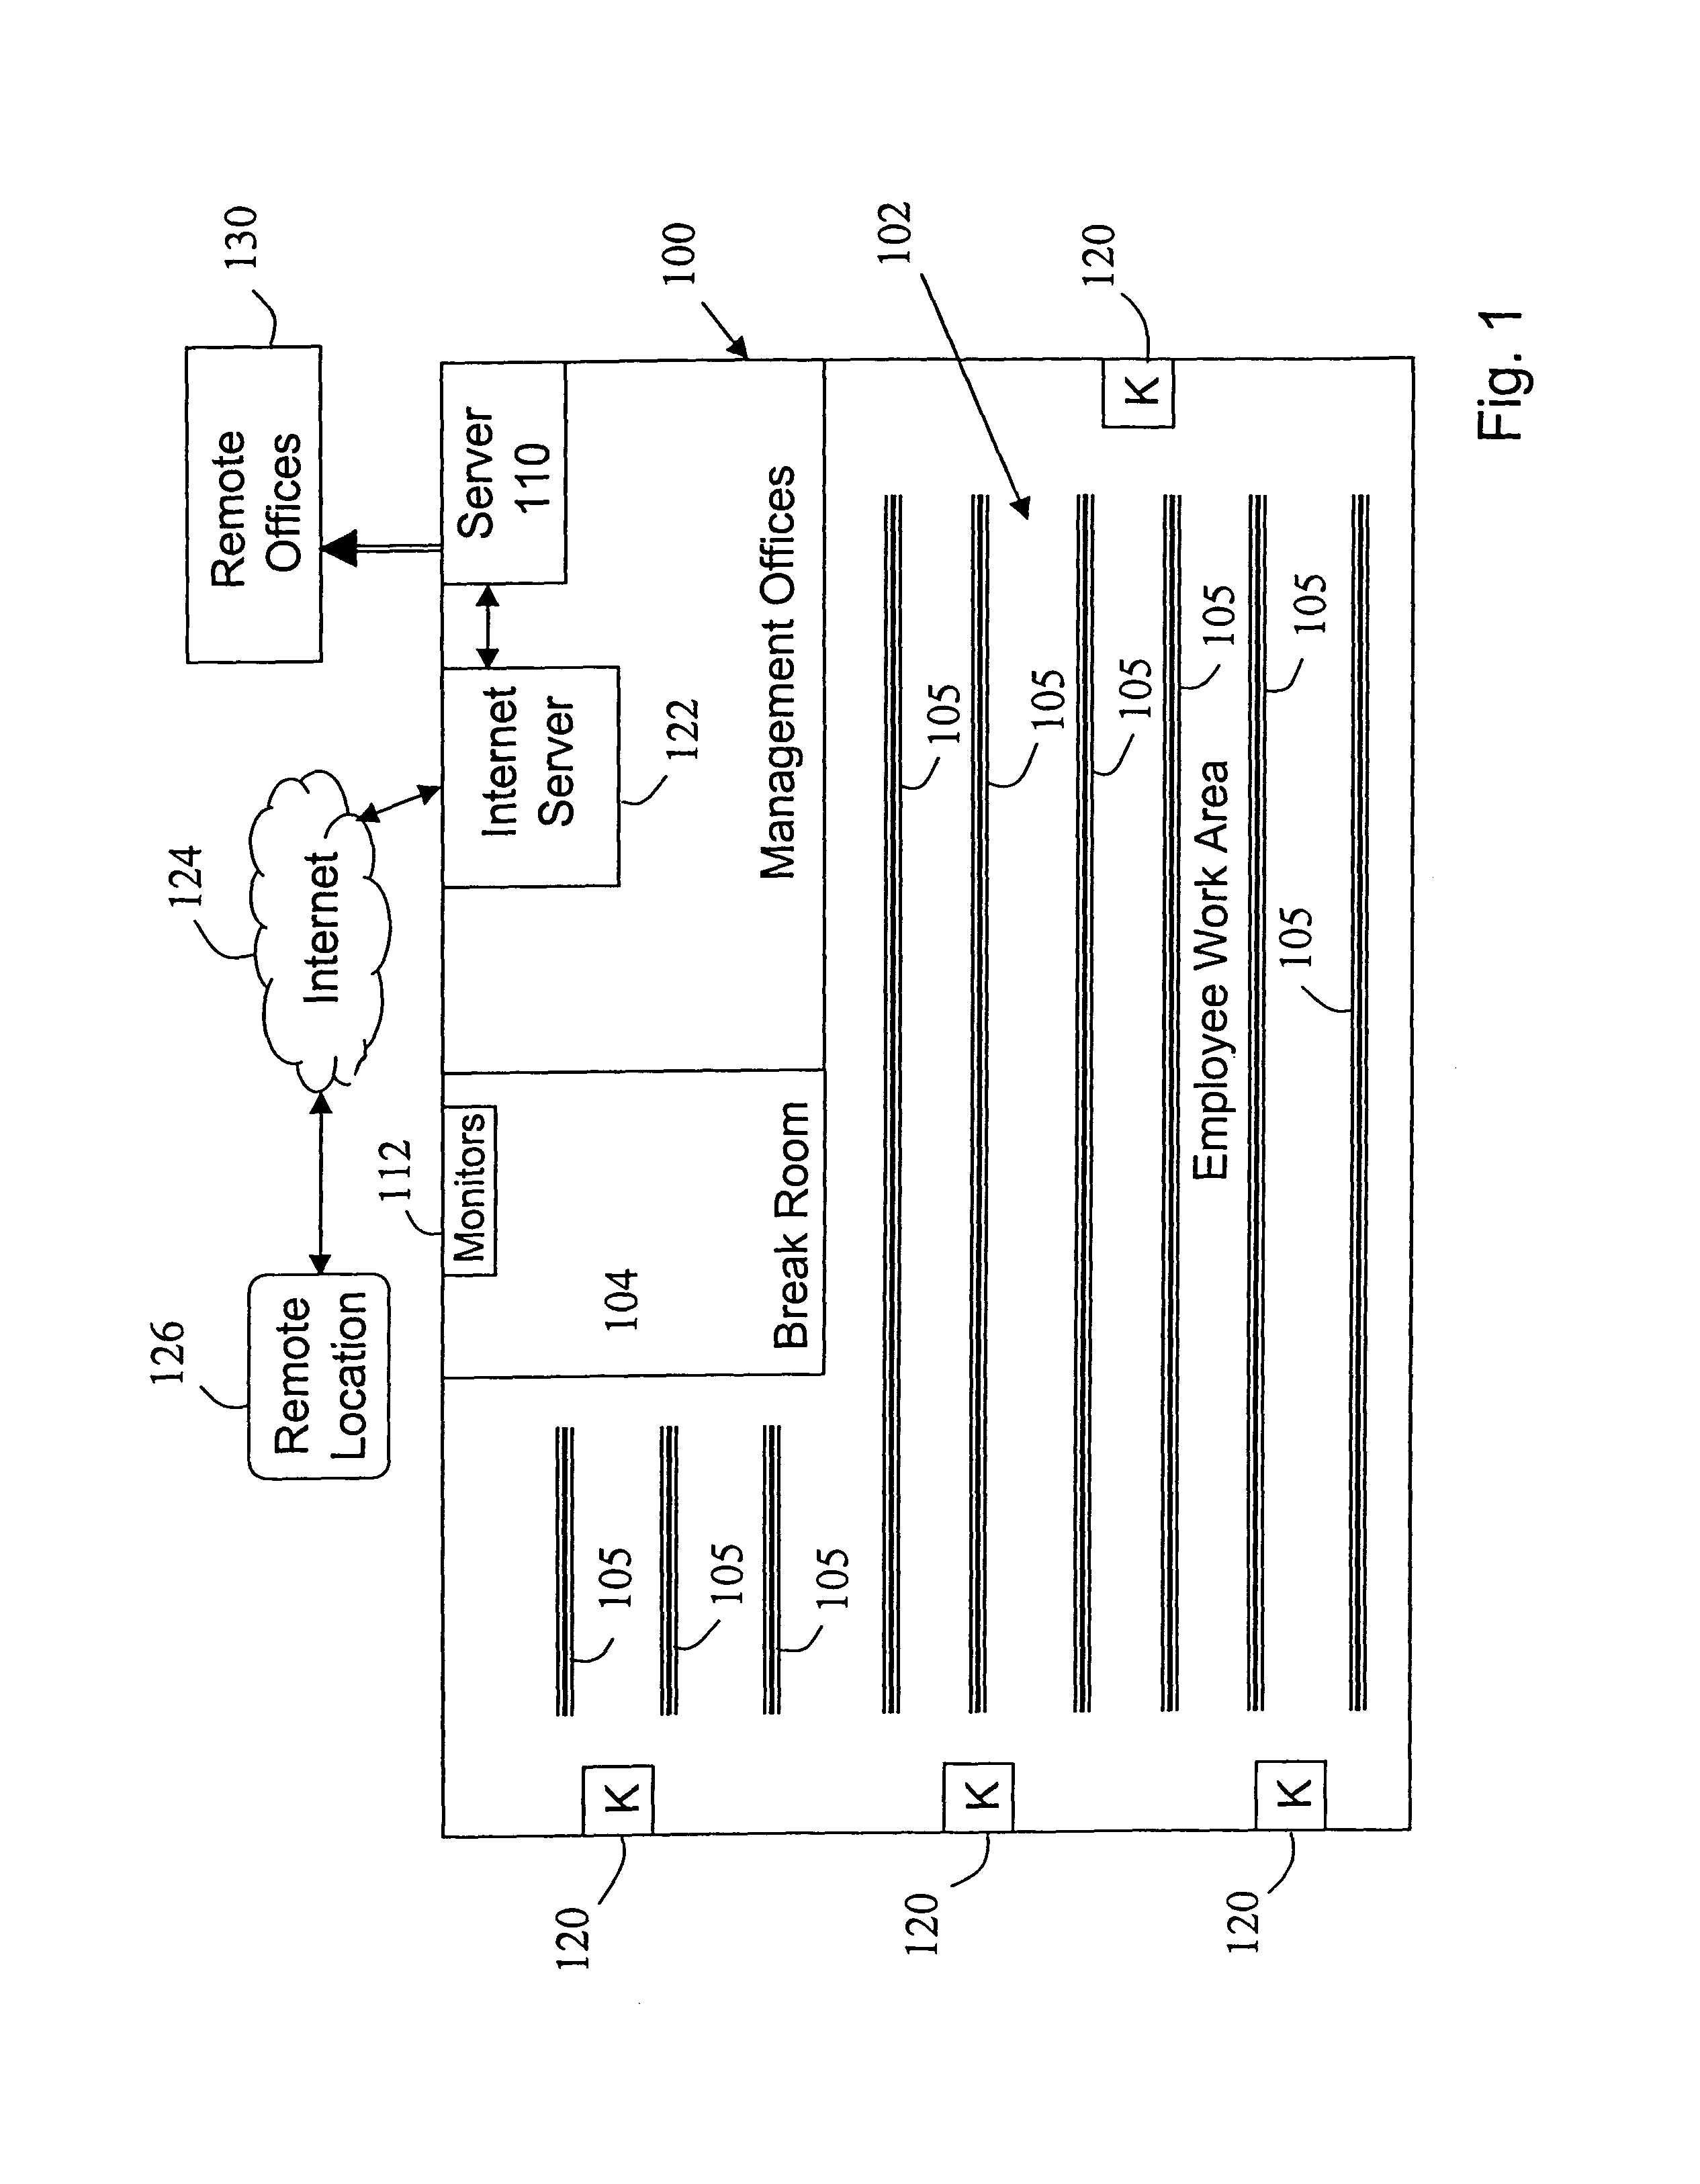 Employee scheduling and schedule modification method and apparatus